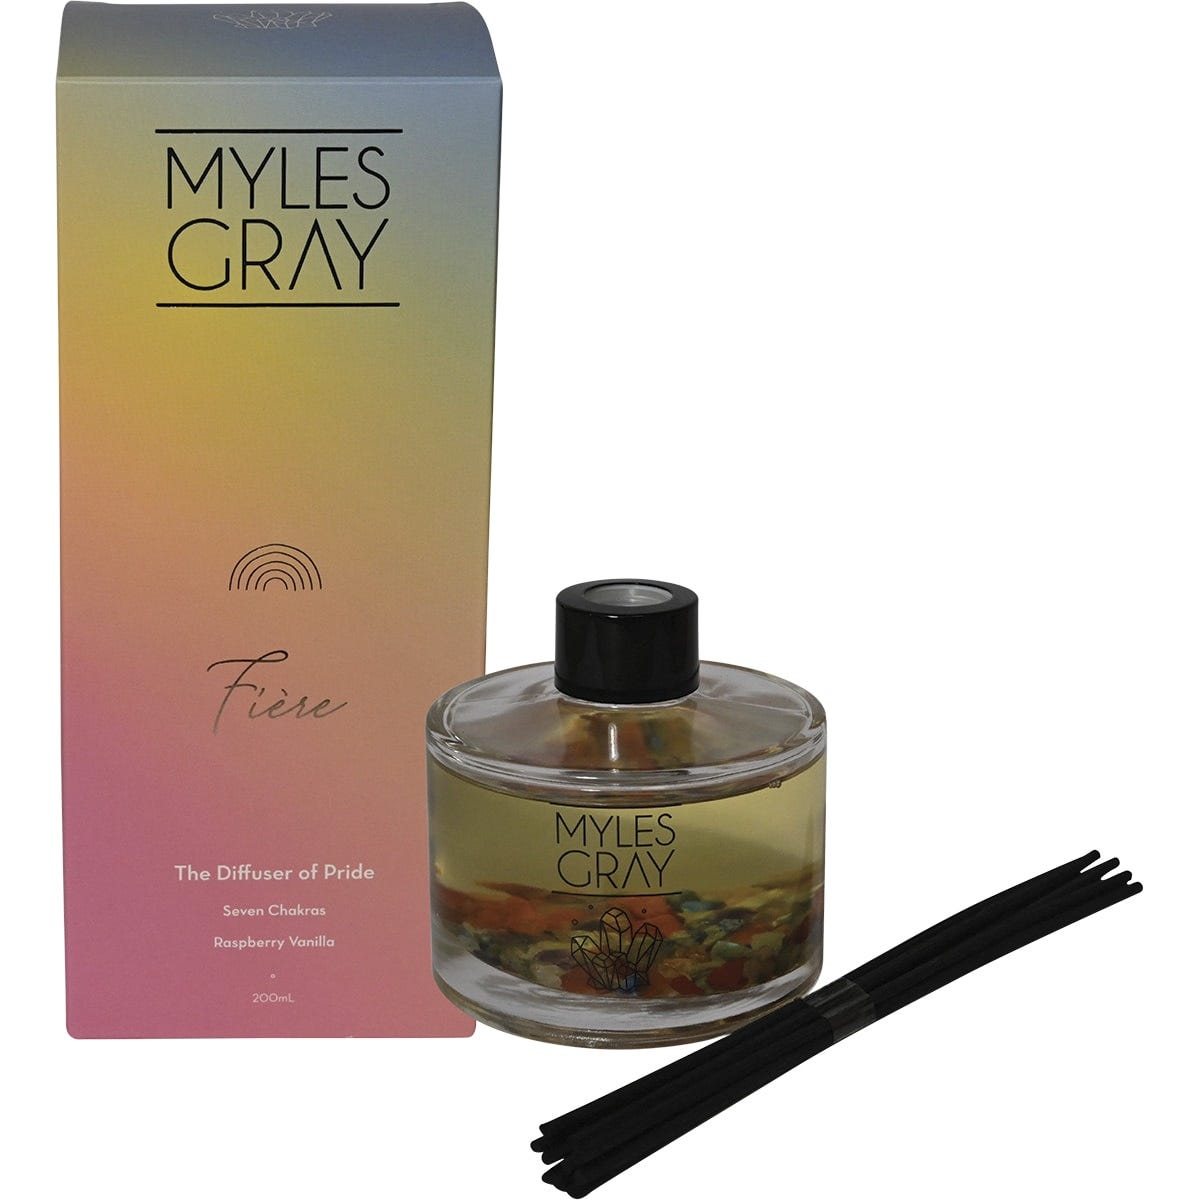 Myles Gray Crystal Infused Reed Diffuser Pride Raspberry Vanilla 200ml - Dr Earth - Aromatherapy, Gifts